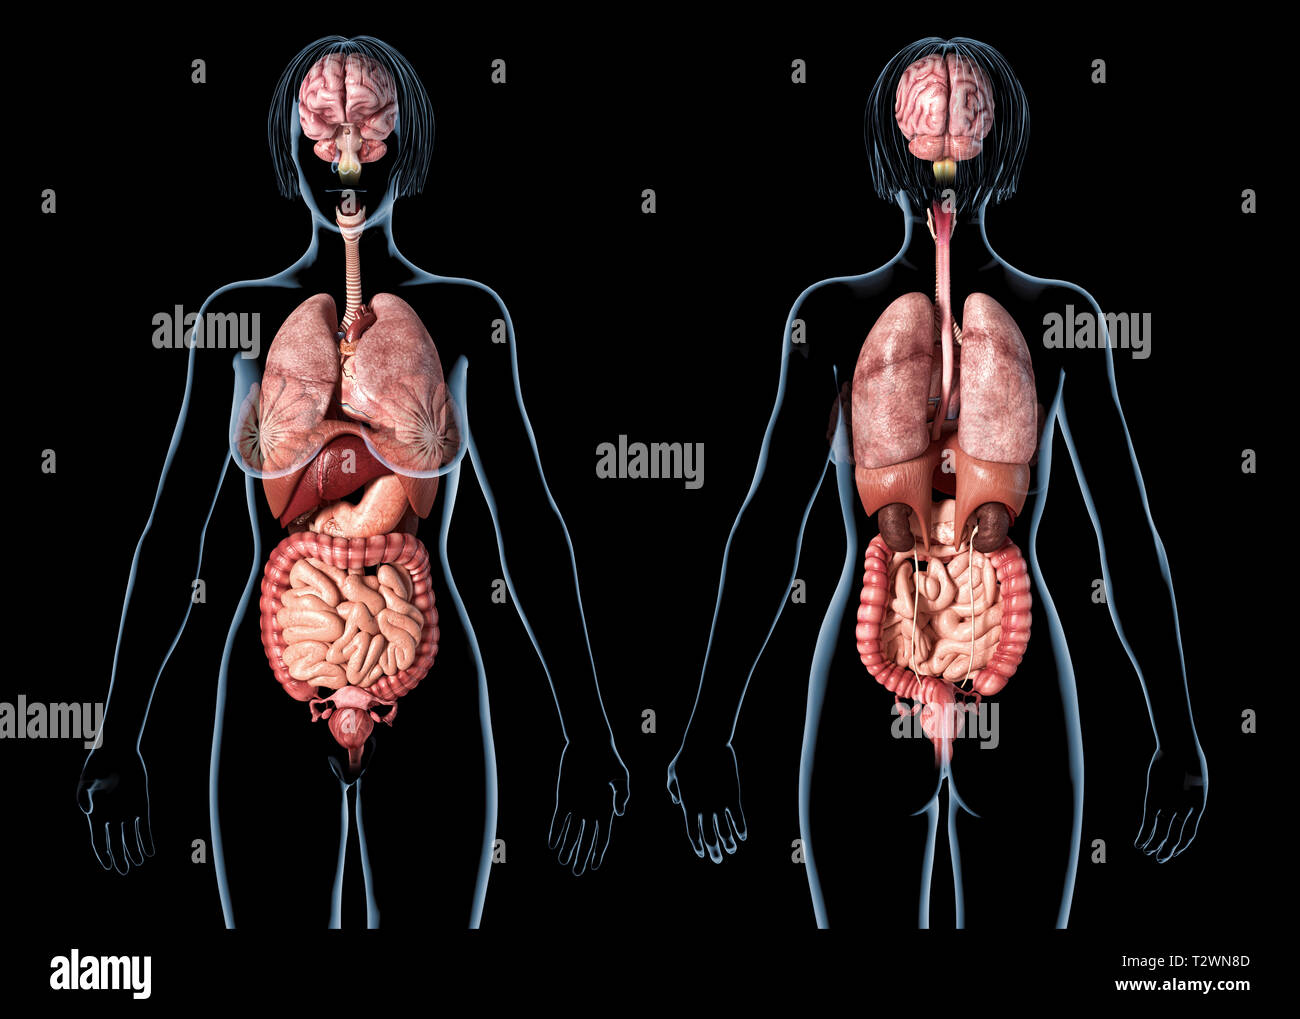 Woman anatomy internal organs, rear and front views. On black background. Stock Photo